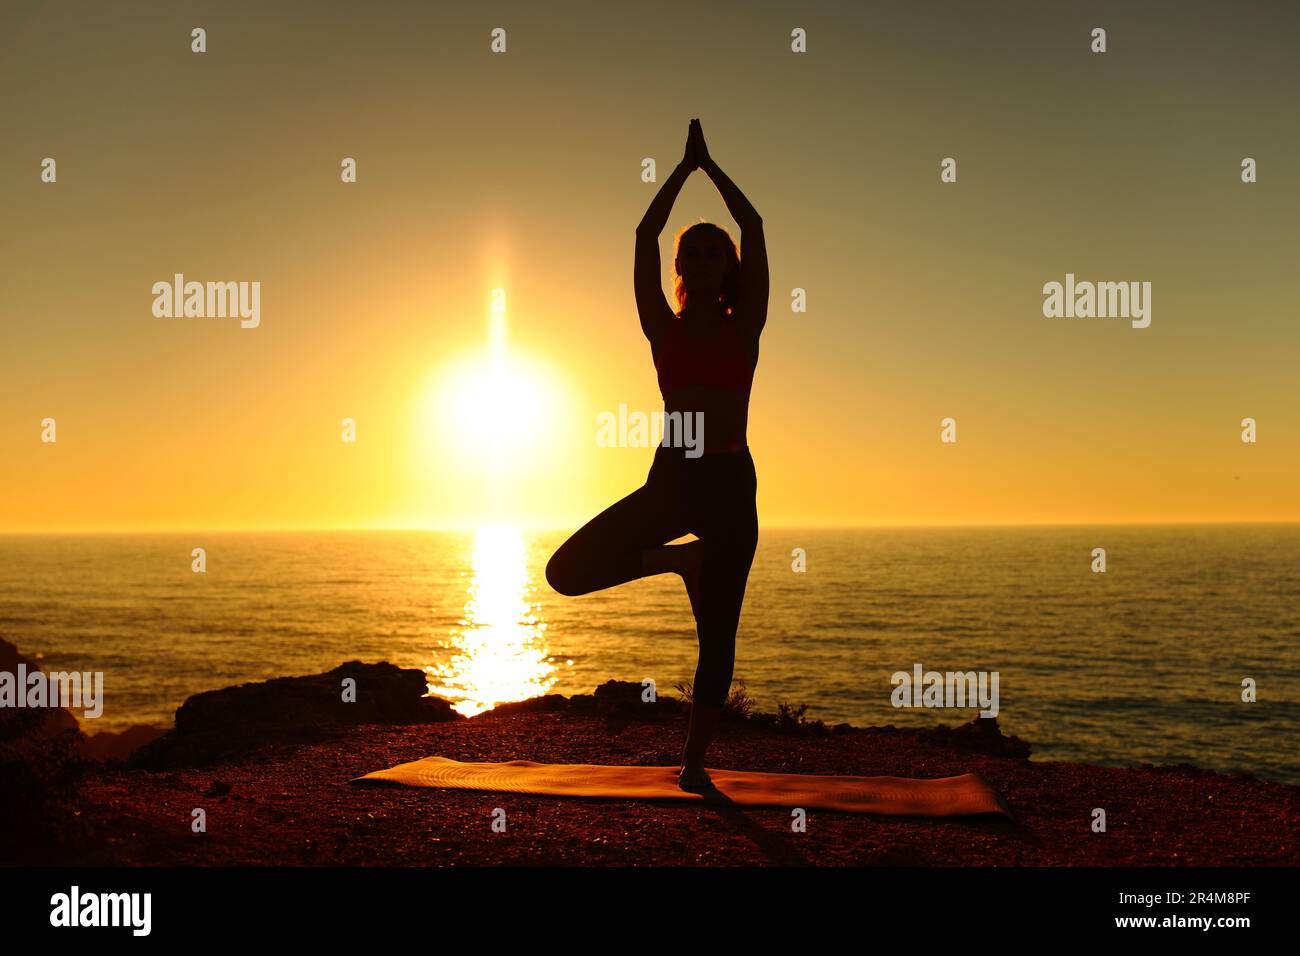 Silhouette of a yogi doing yoga exercise at sunset on the beach Stock Photo